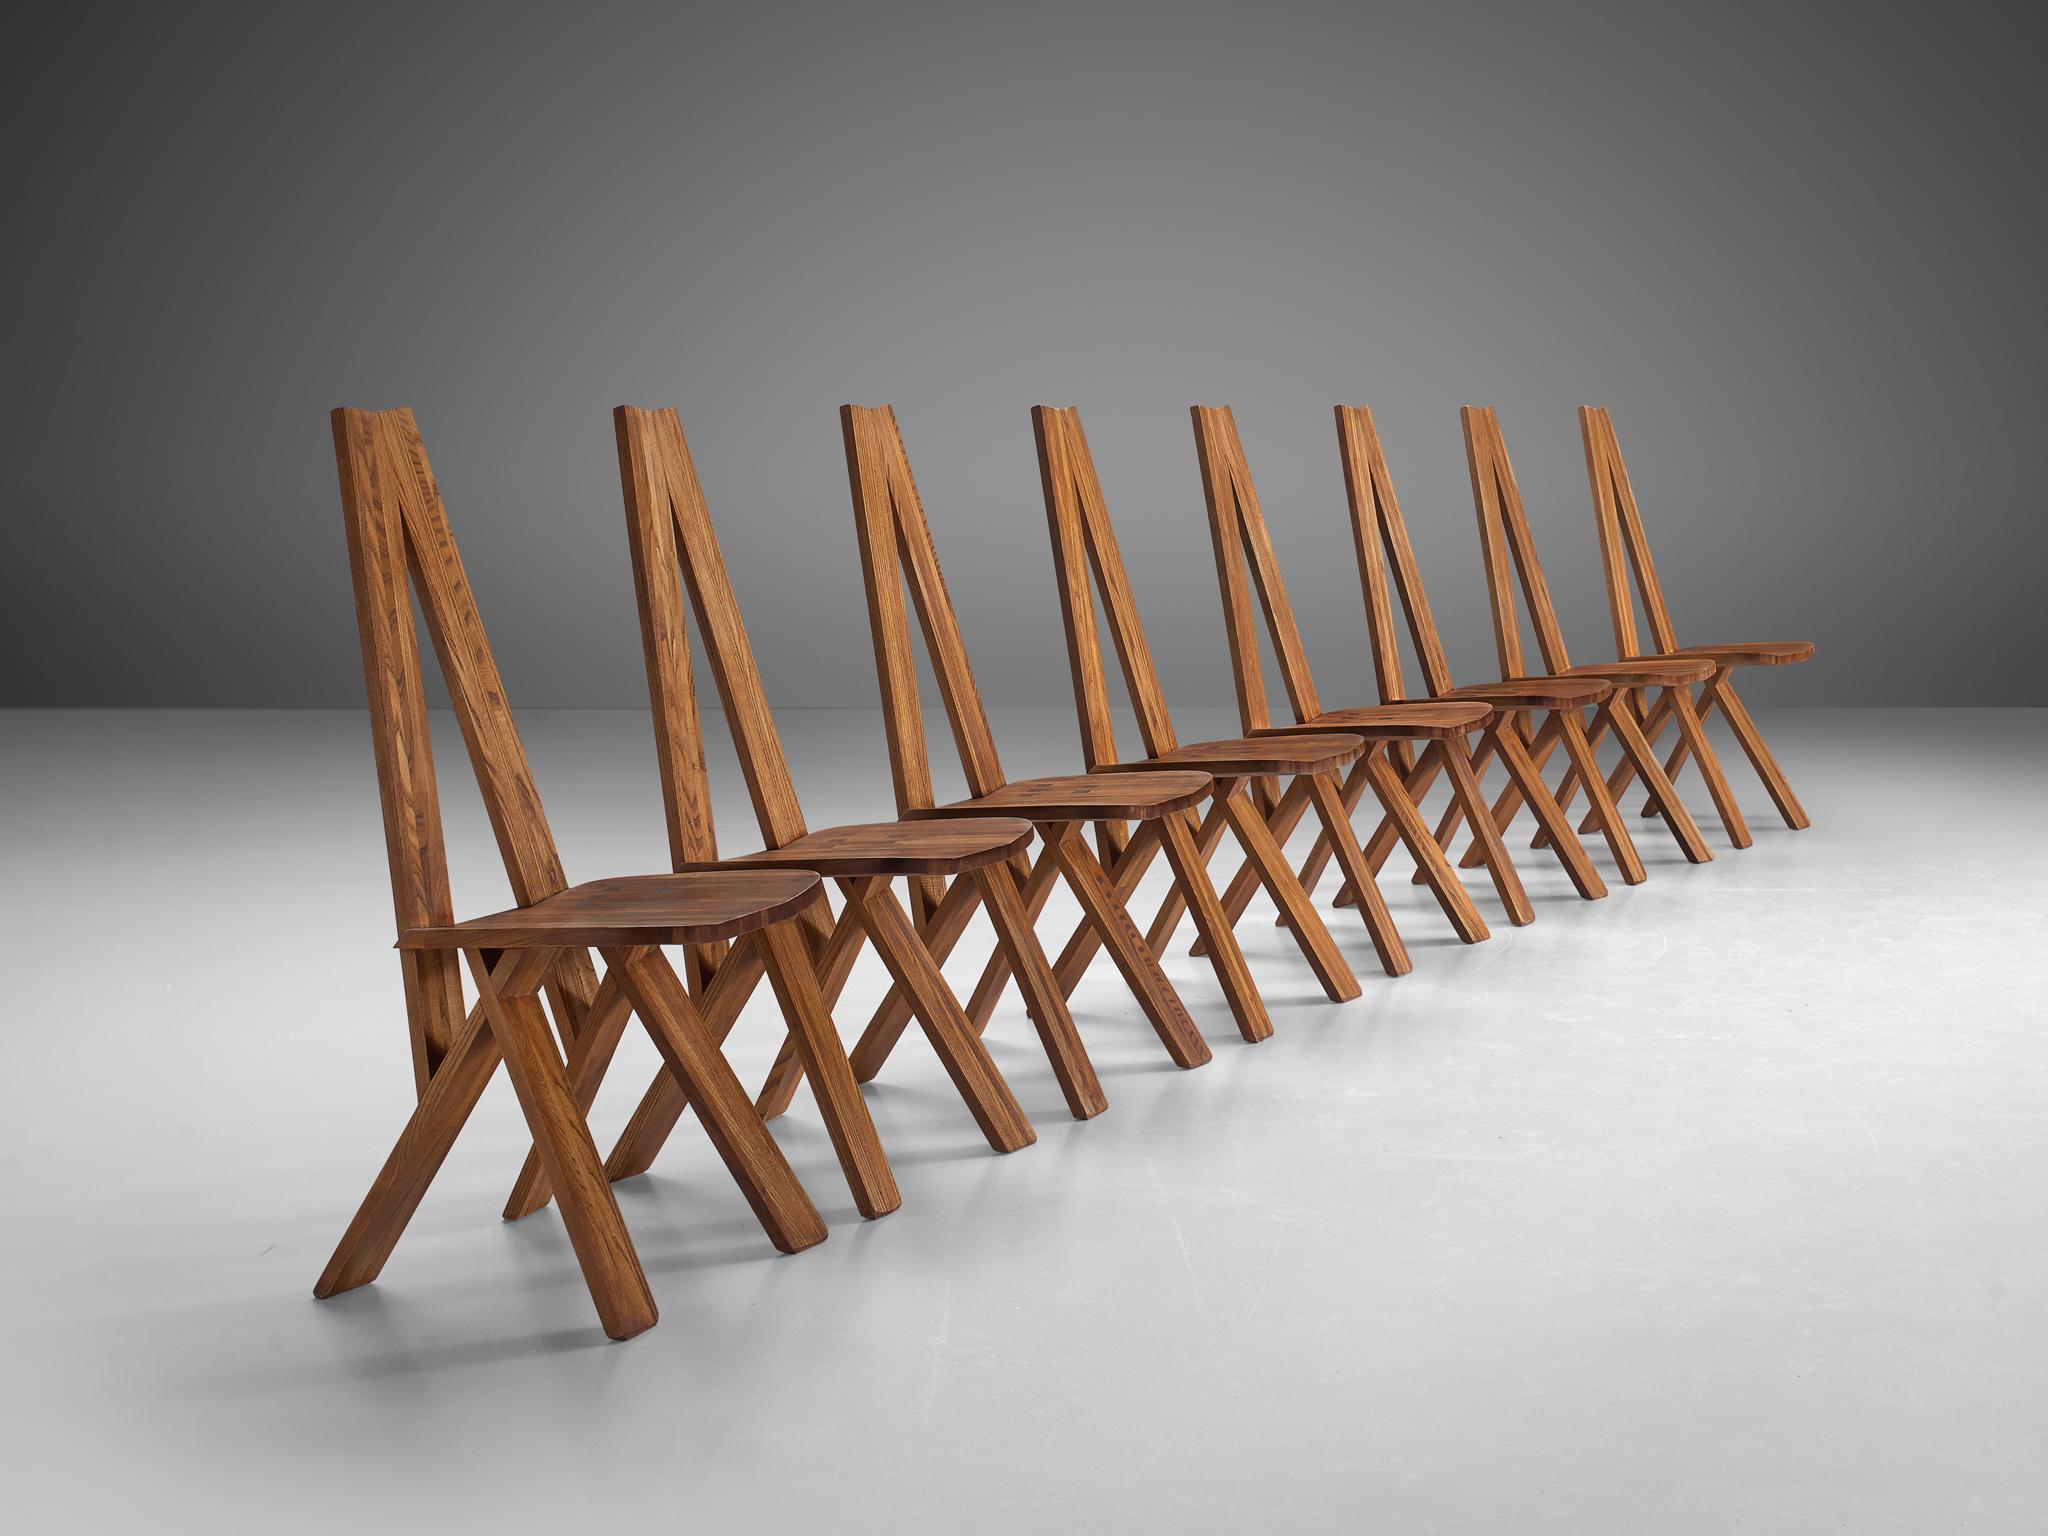 Pierre Chapo, 'Chlacc' chairs S45, elm, France, circa 1979

These 'Chlacc' dining chairs, model S45, is executed in solid elmwood, designed by Pierre Chapo. These extraordinary chairs are in excellent condition, showing an admirable patina. Due to